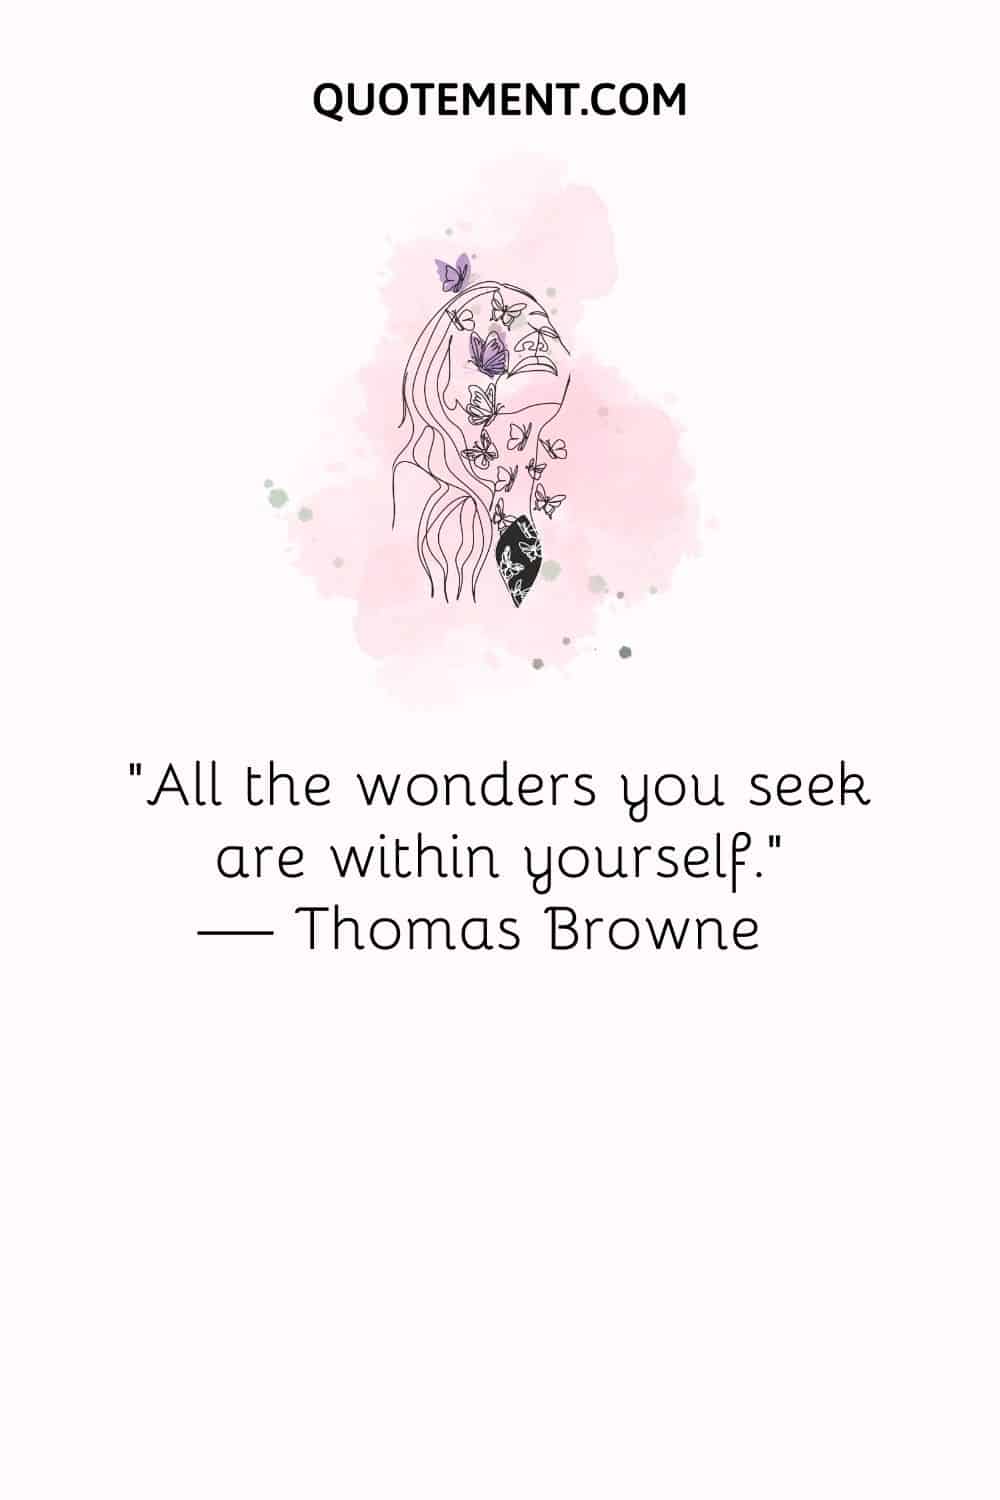 All the wonders you seek are within yourself.